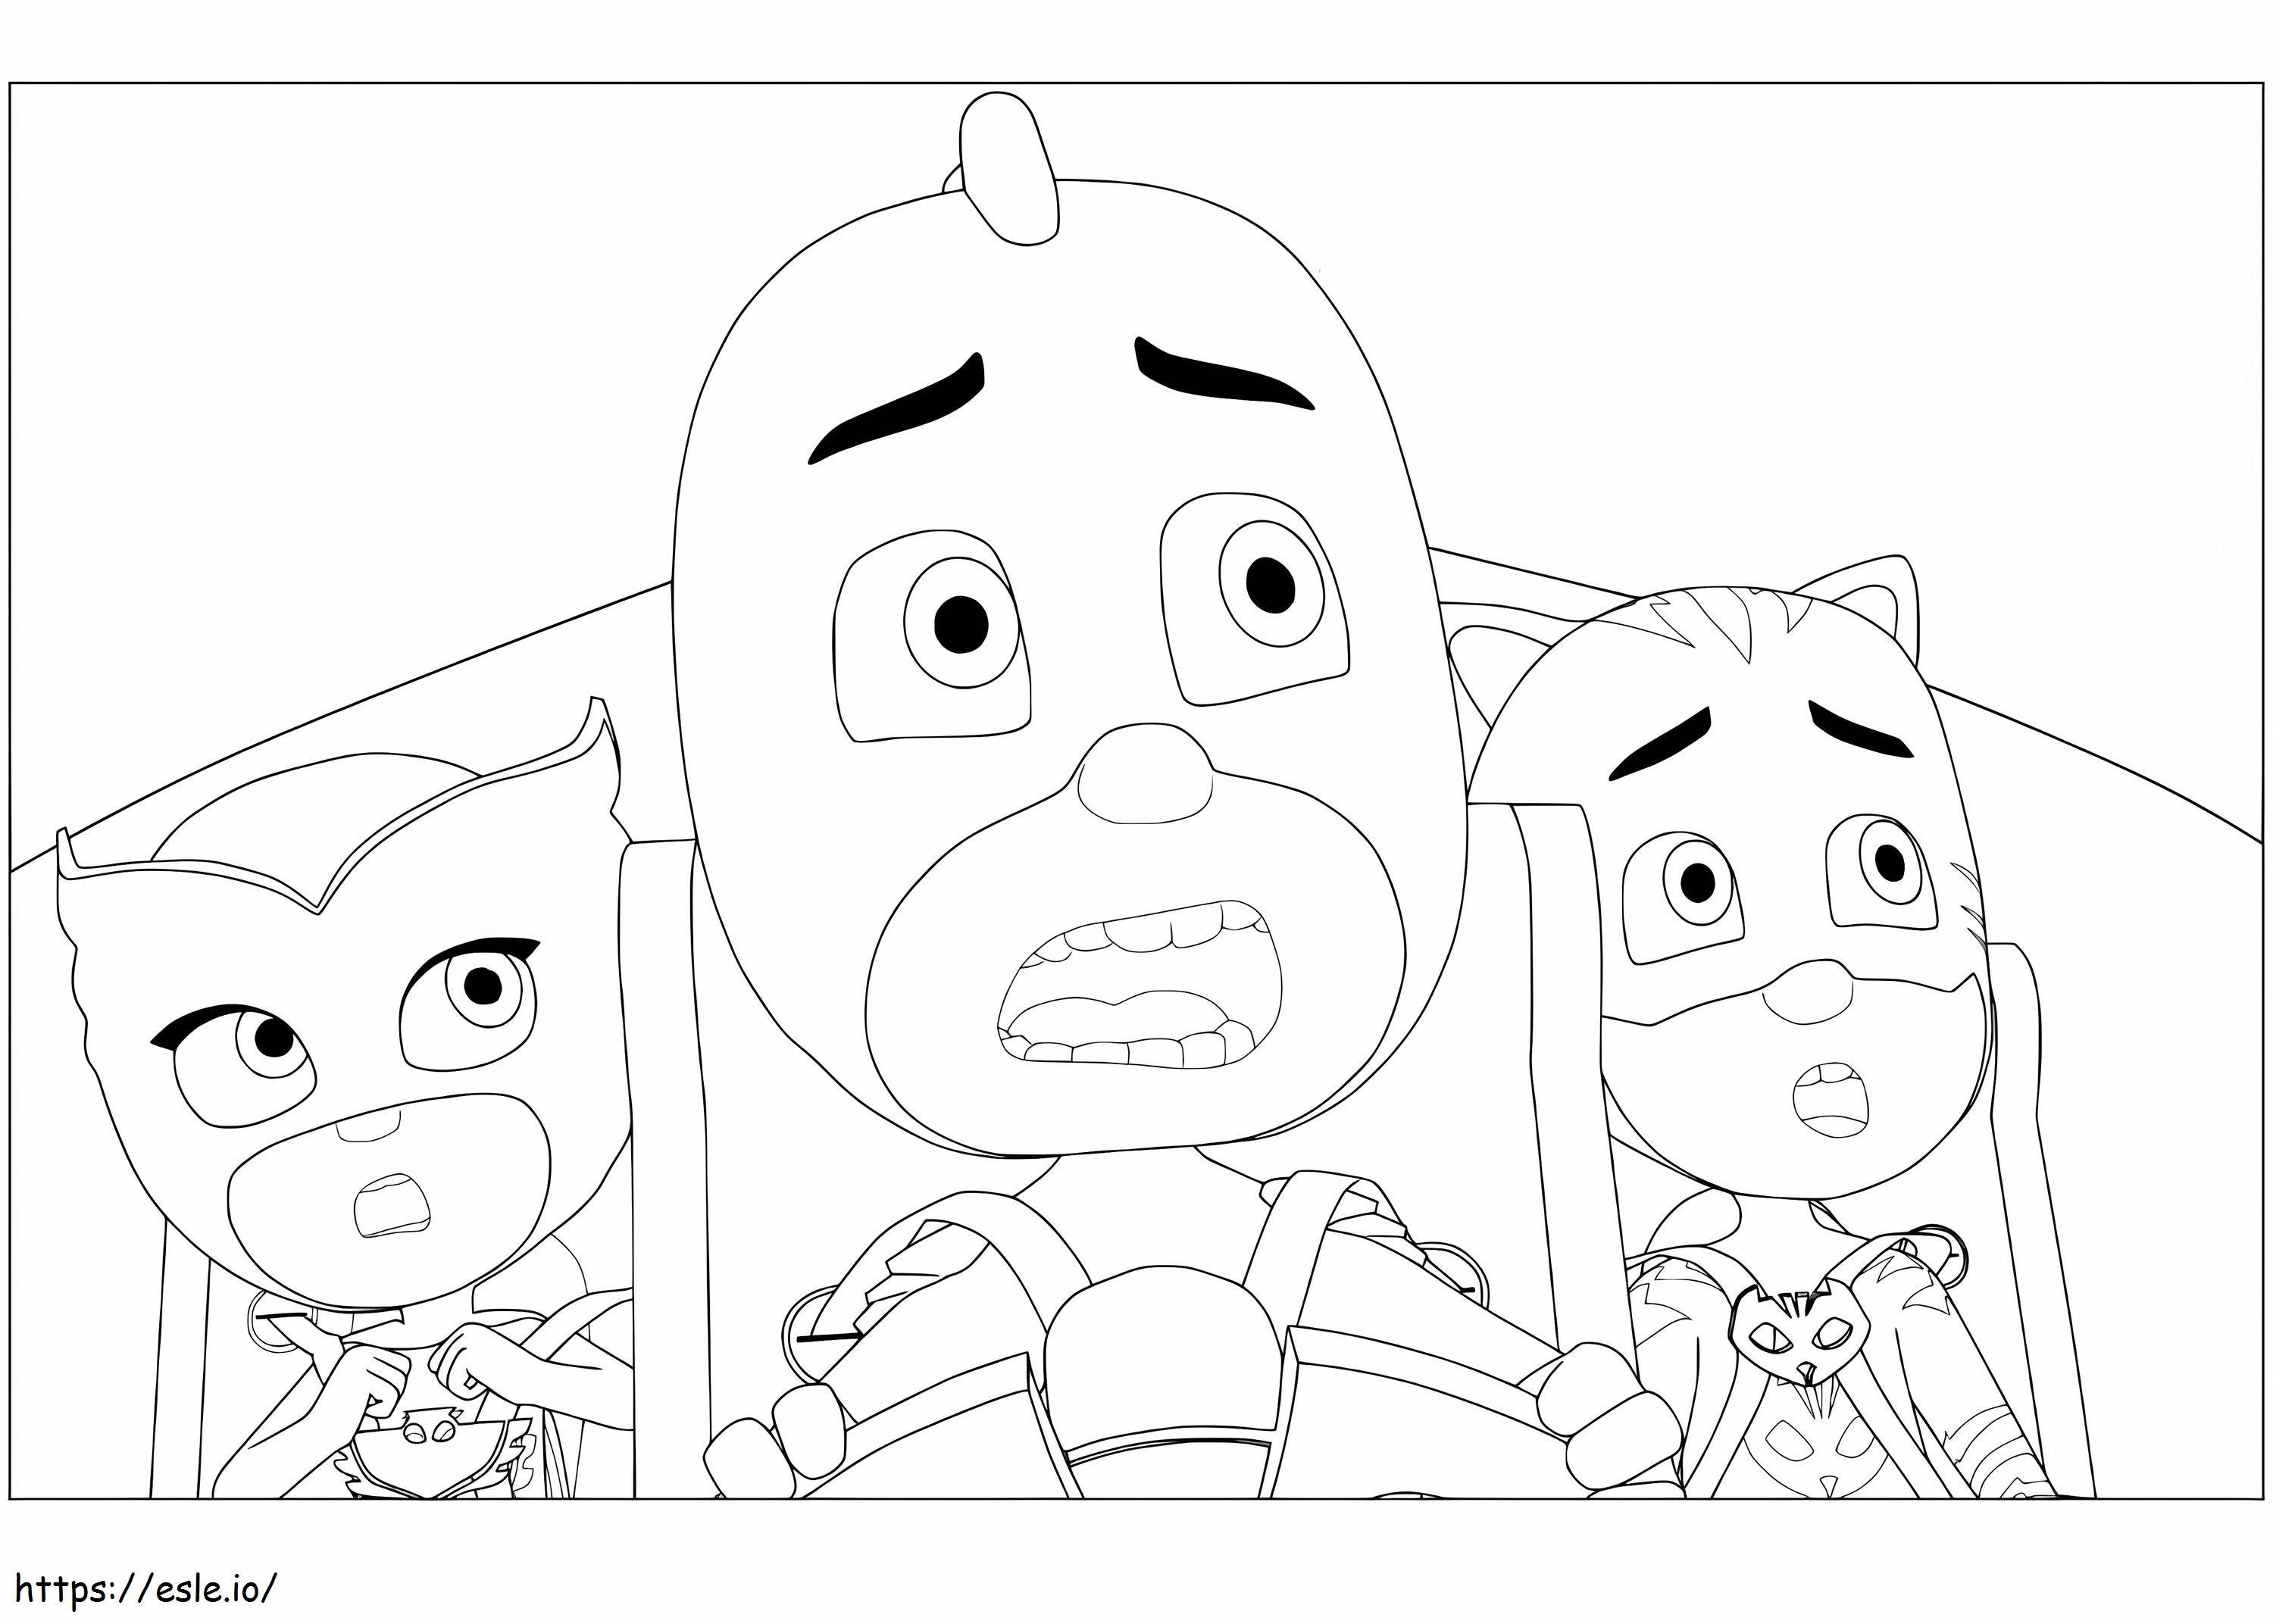 Scared PJ Masks coloring page